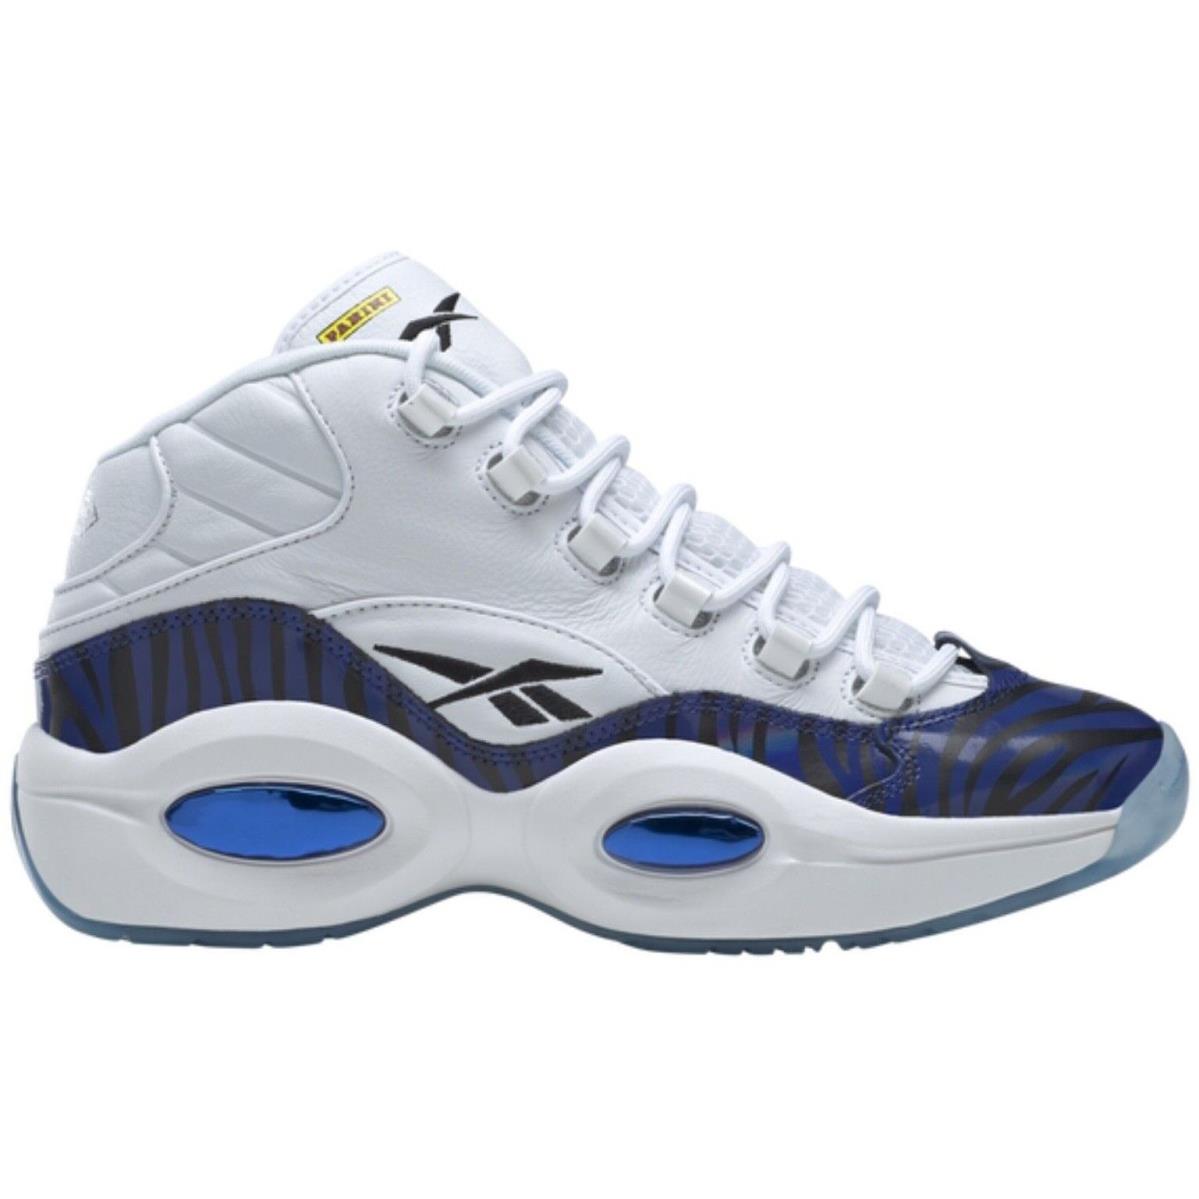 Reebok Question Mid Men`s Basketball Shoes All Colors US Sizes 7-14 White / Blue / Black